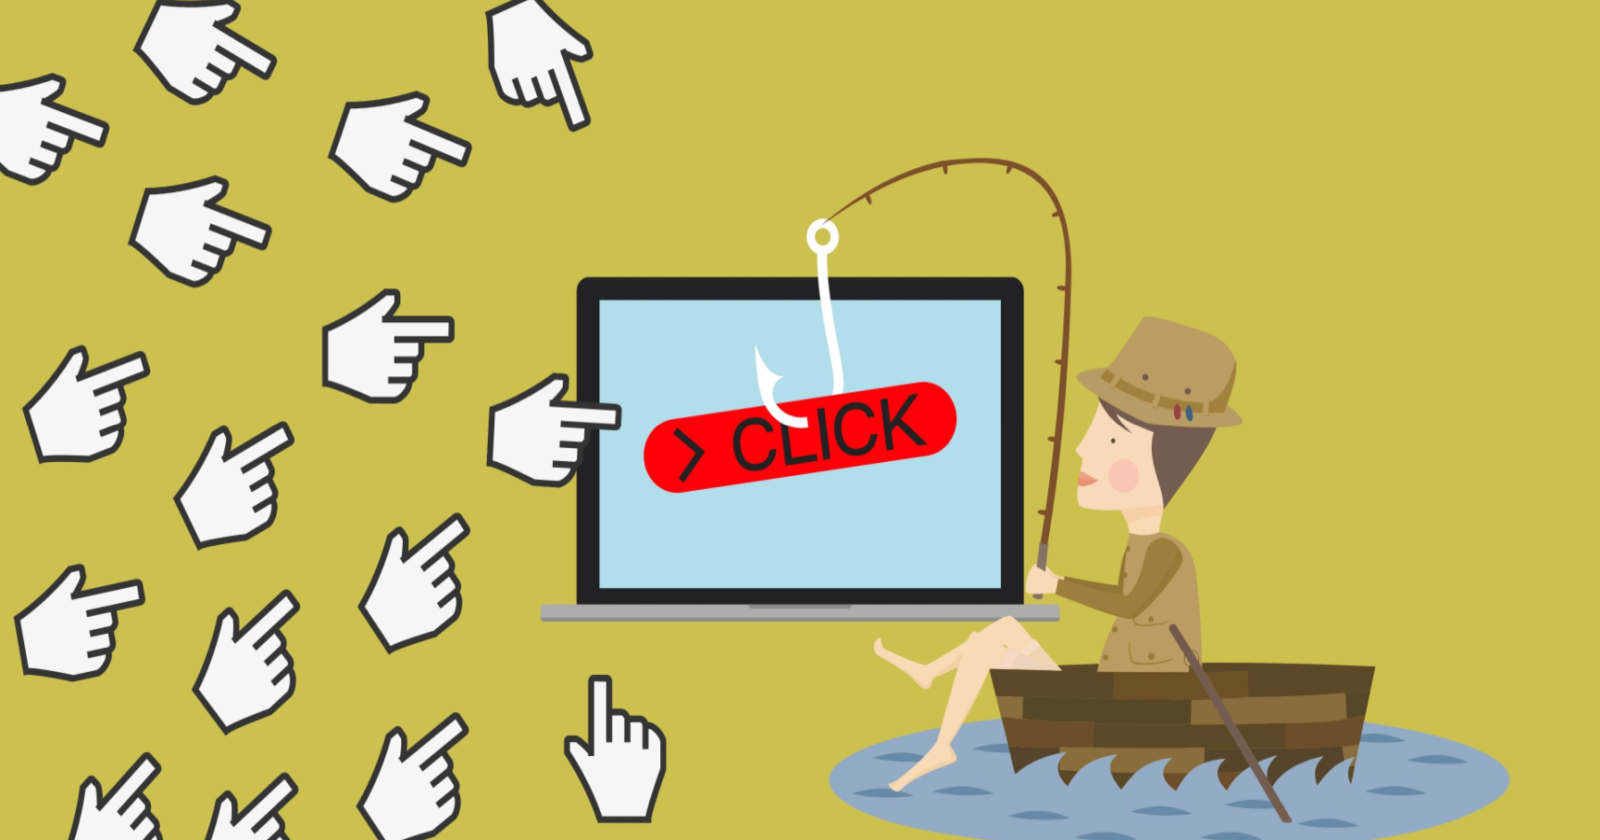 $115M In Ad Spend Lost To Clickbait Sites, Report Finds via @sejournal, @Juxtacognition